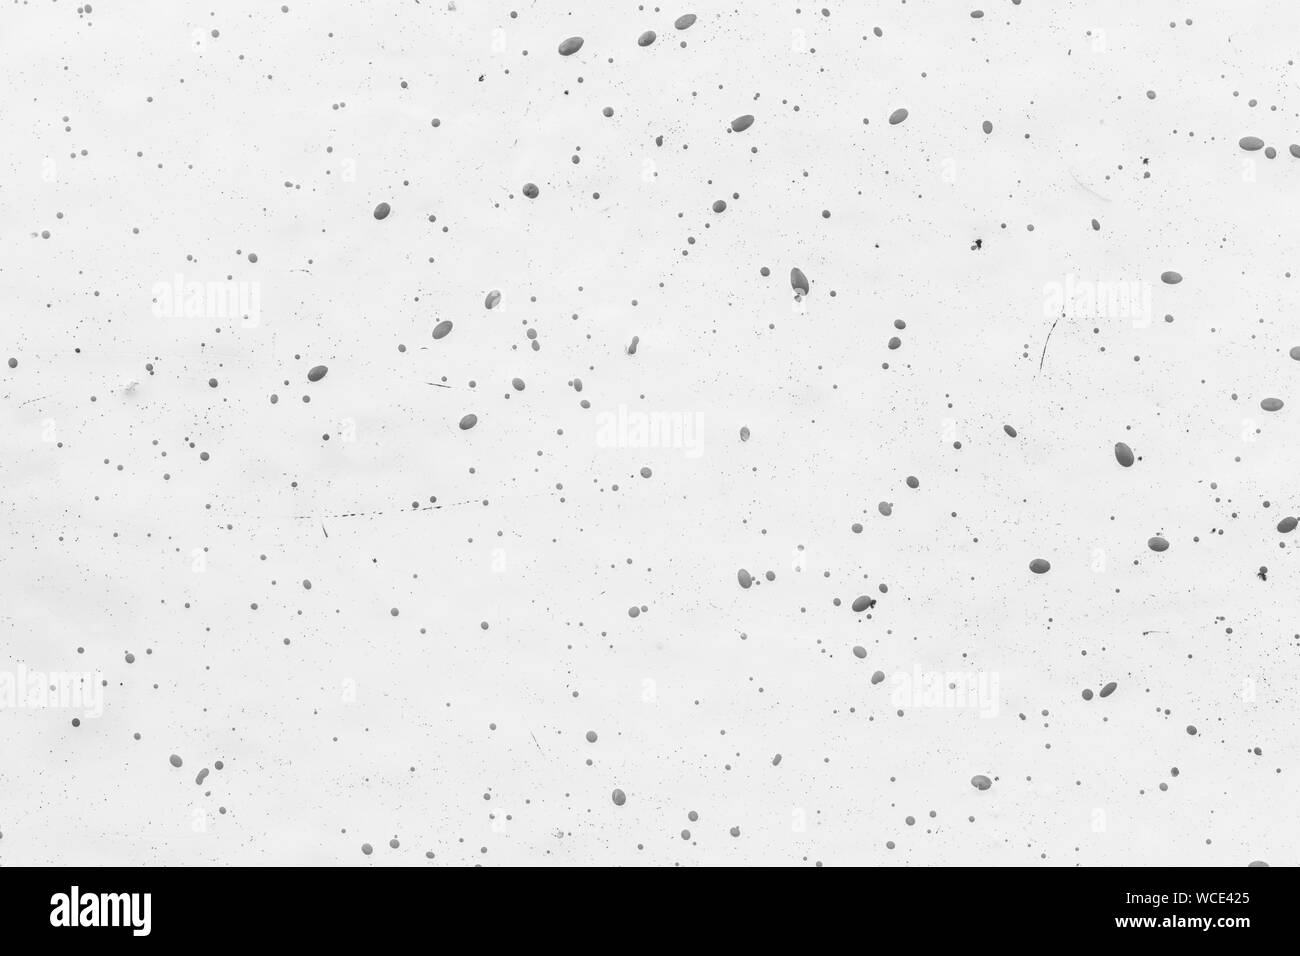 Close-up of a white fiberglass (fibreglass) surface with dots in black and white. High resolution full frame abstract background. Copy space. Stock Photo